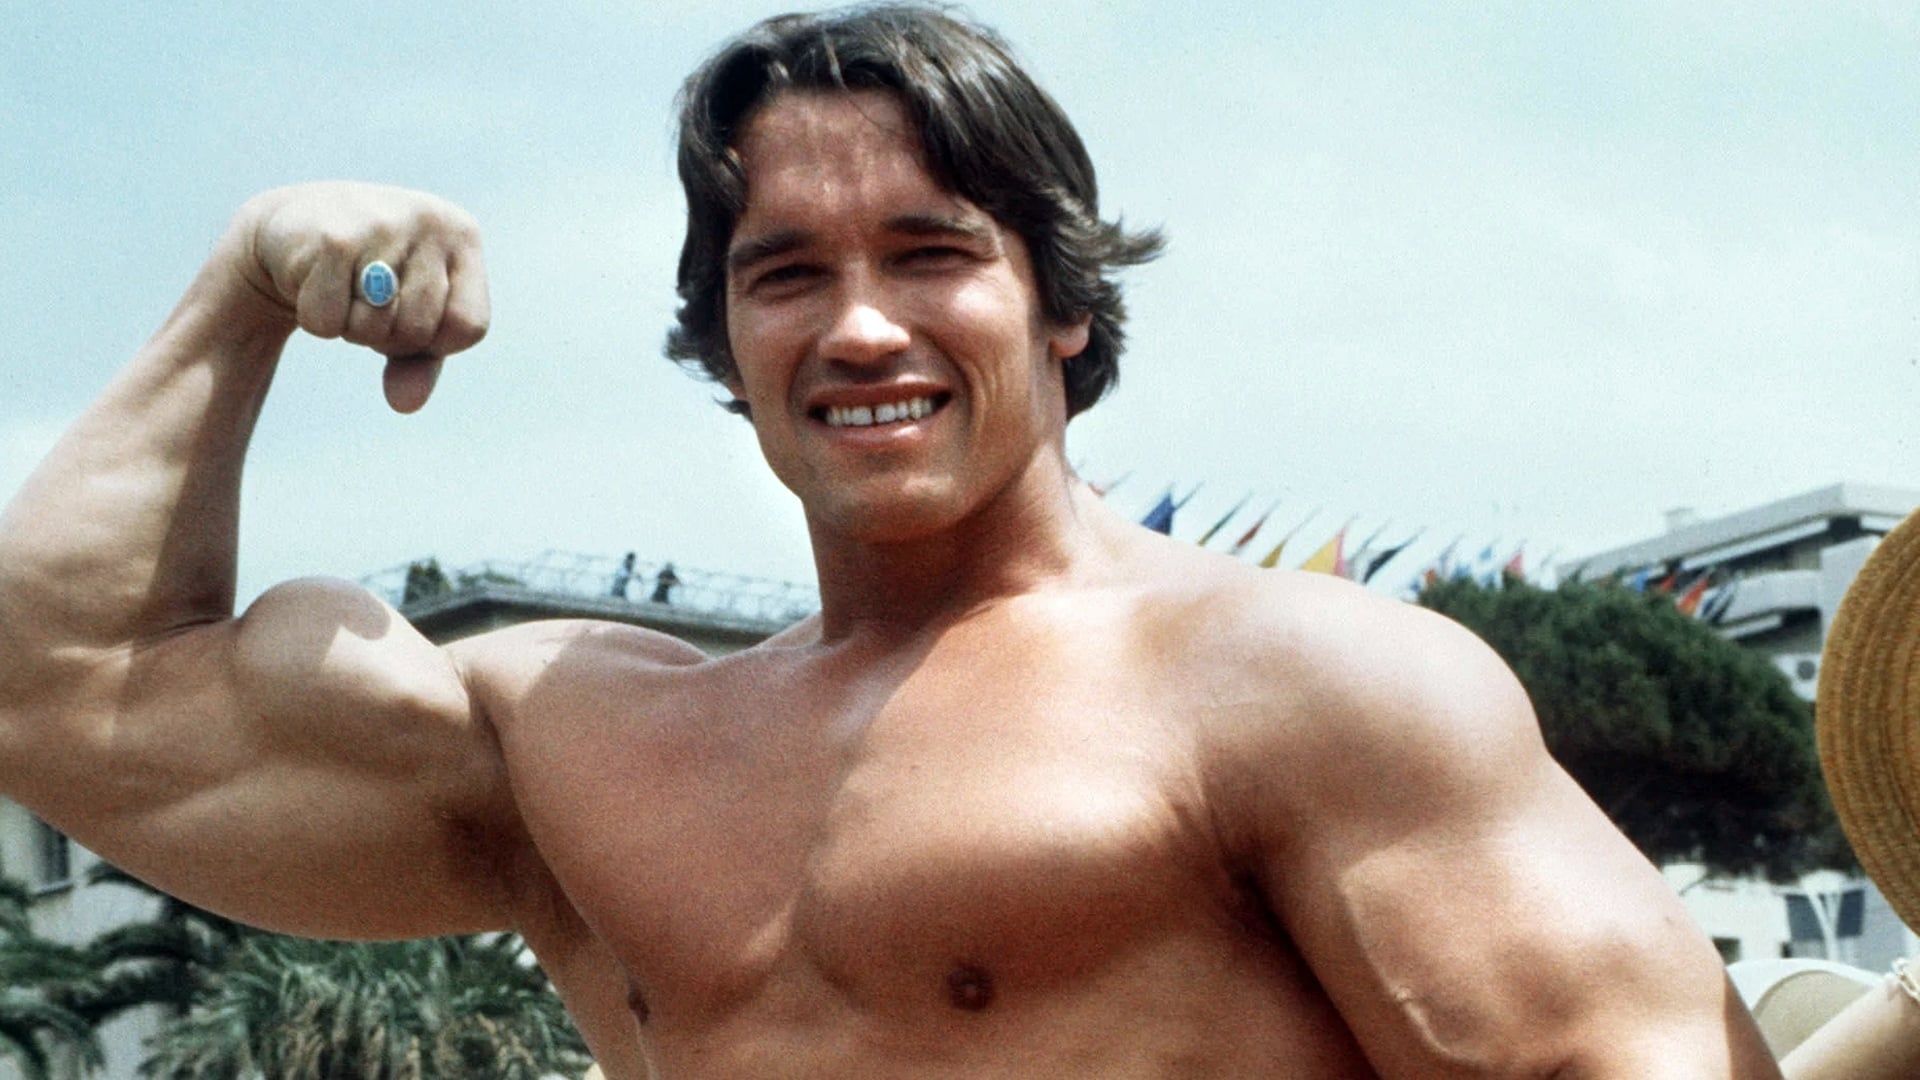 Raw Iron: The Making of 'Pumping Iron' background